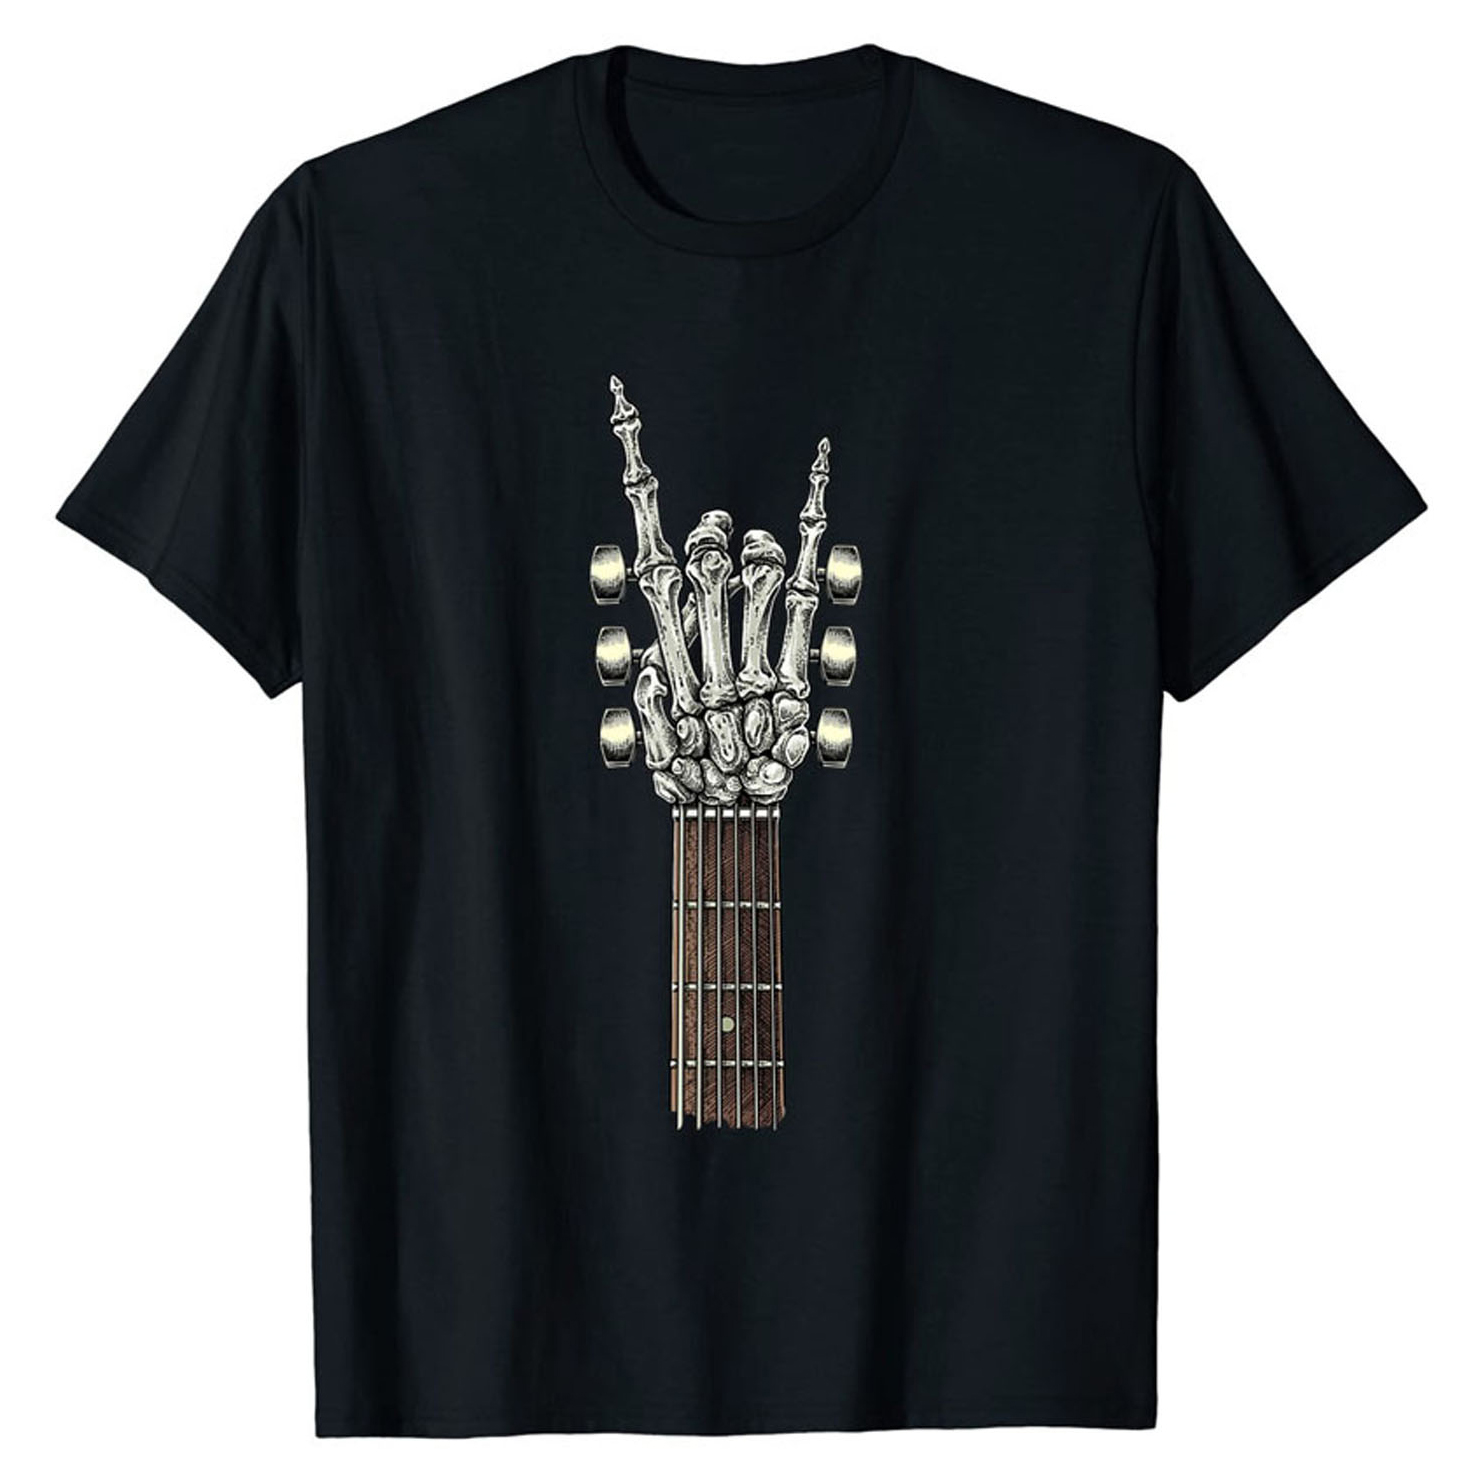 

Tees For Men, Rock And Roll Guitar Print T Shirt, Casual Short Sleeve Tshirt For Summer Spring Fall, Tops As Gifts